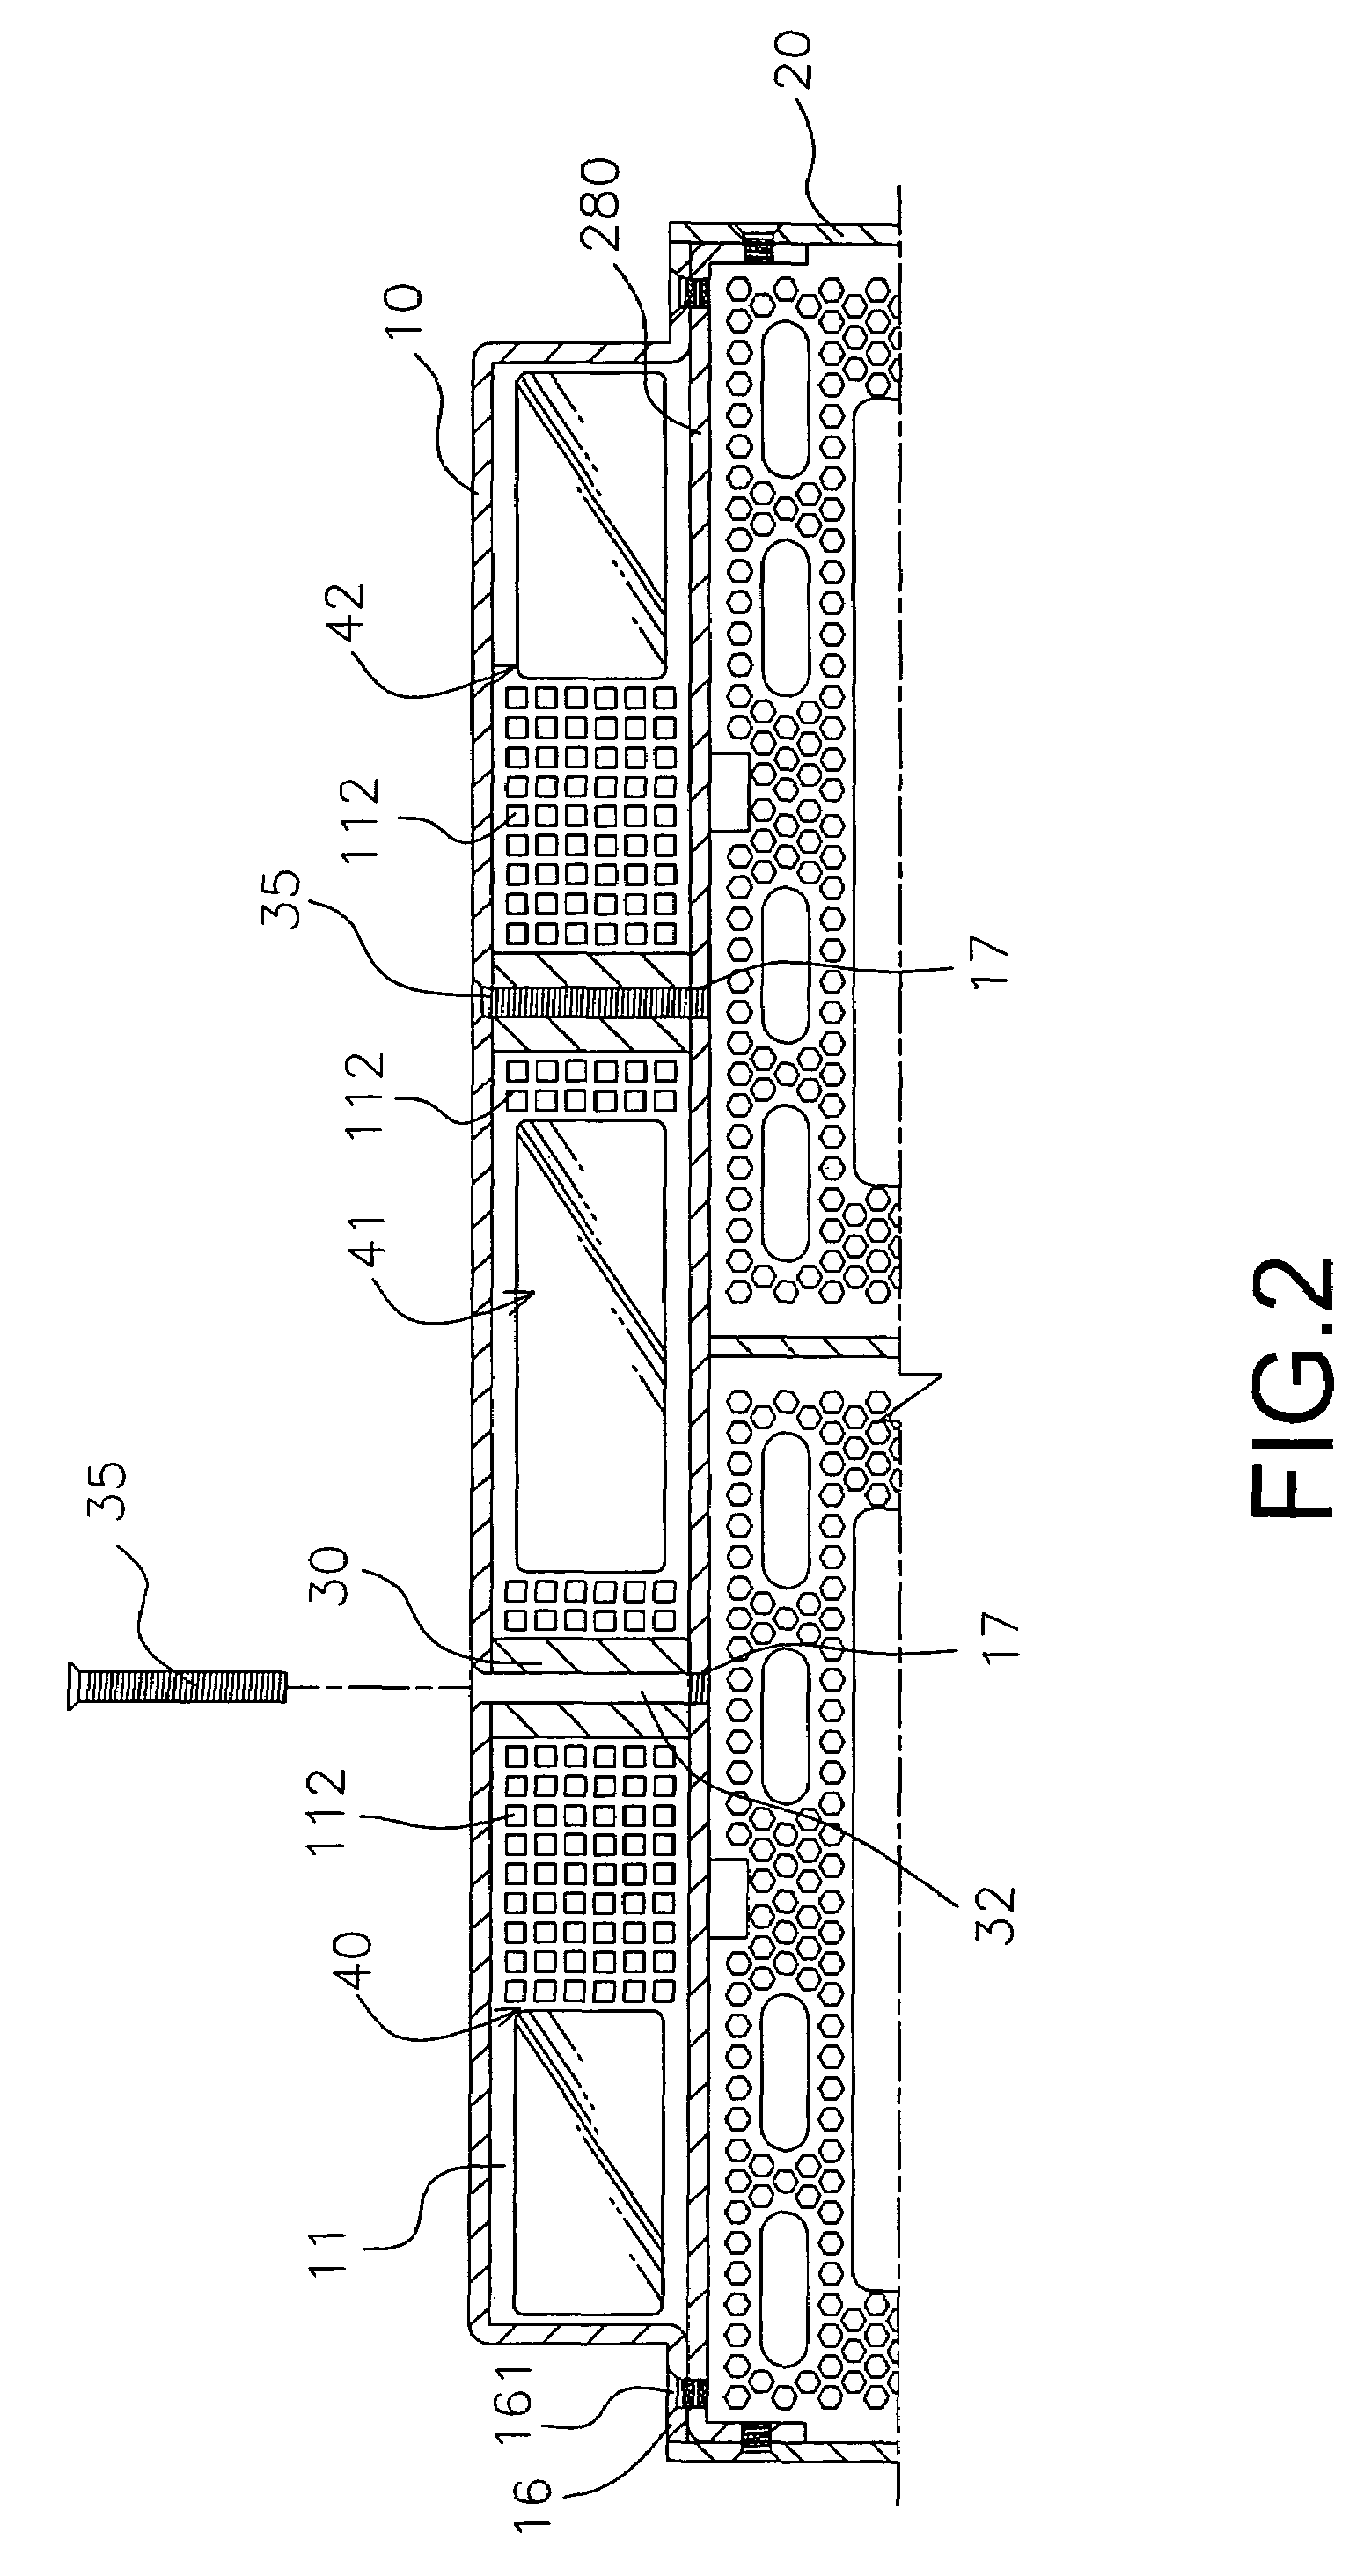 Partitioning device for holding slots of a host computer case